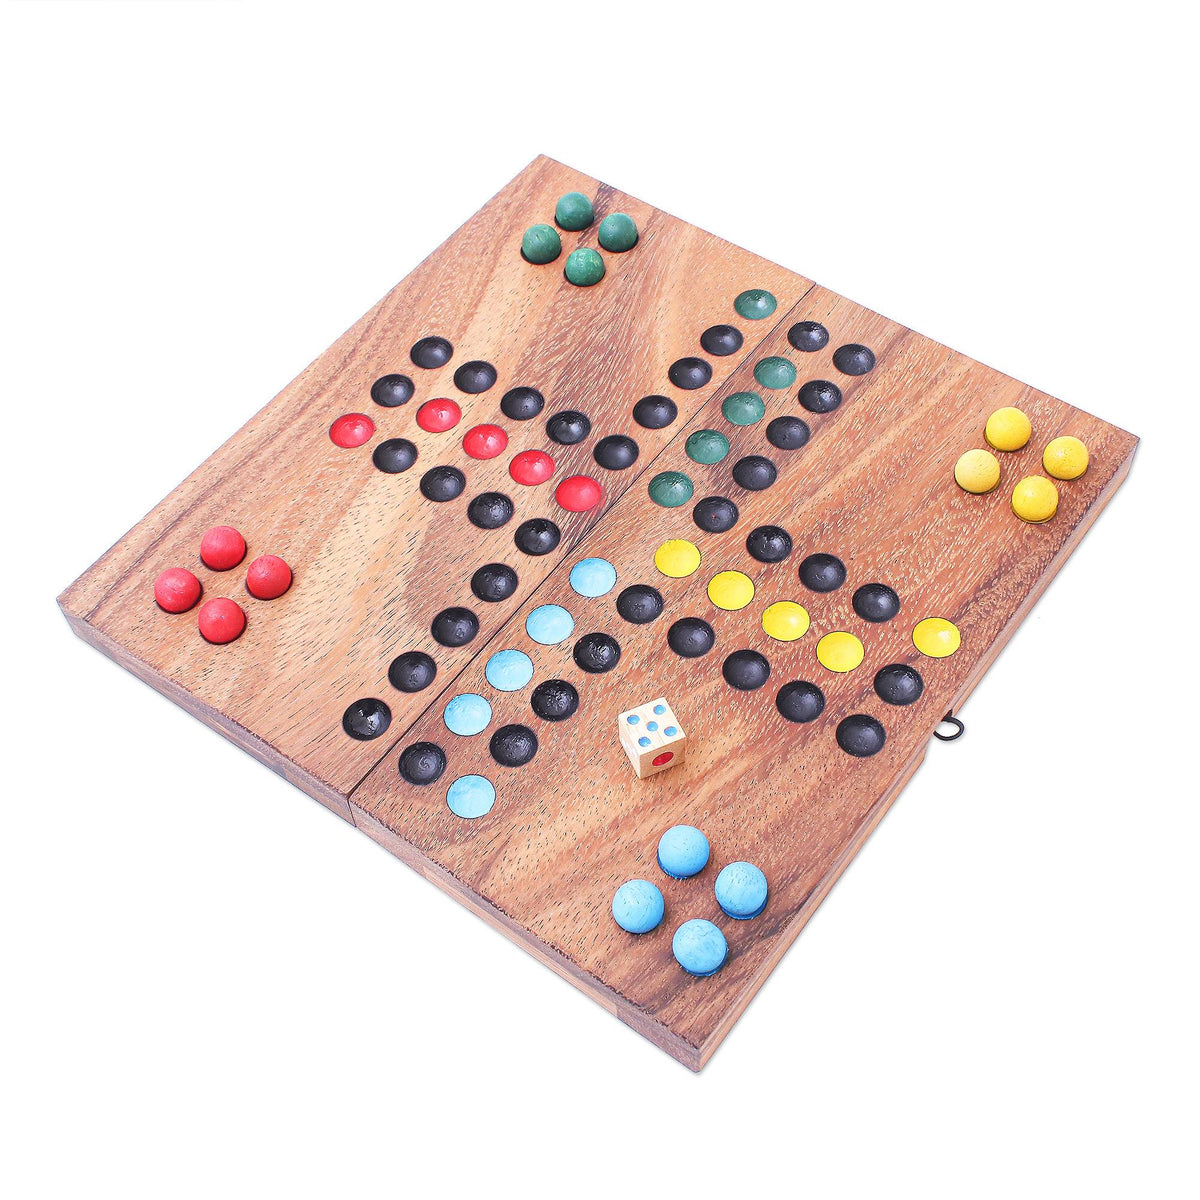 "Ludo" - Handcrafted Folding Wood Ludo Game